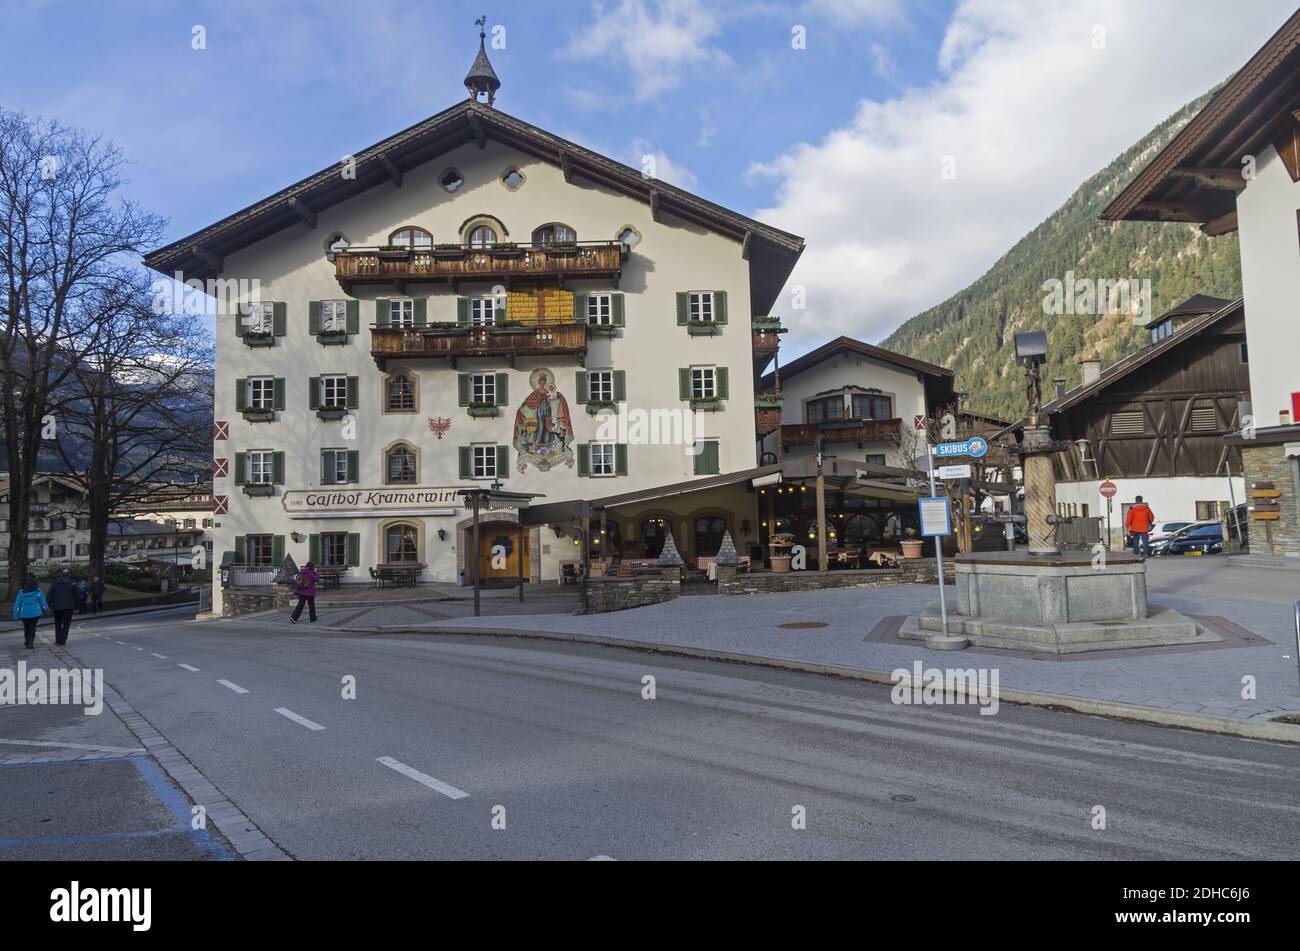 Decorated in the traditional Tyrolean style facade of the hotel. Stock Photo